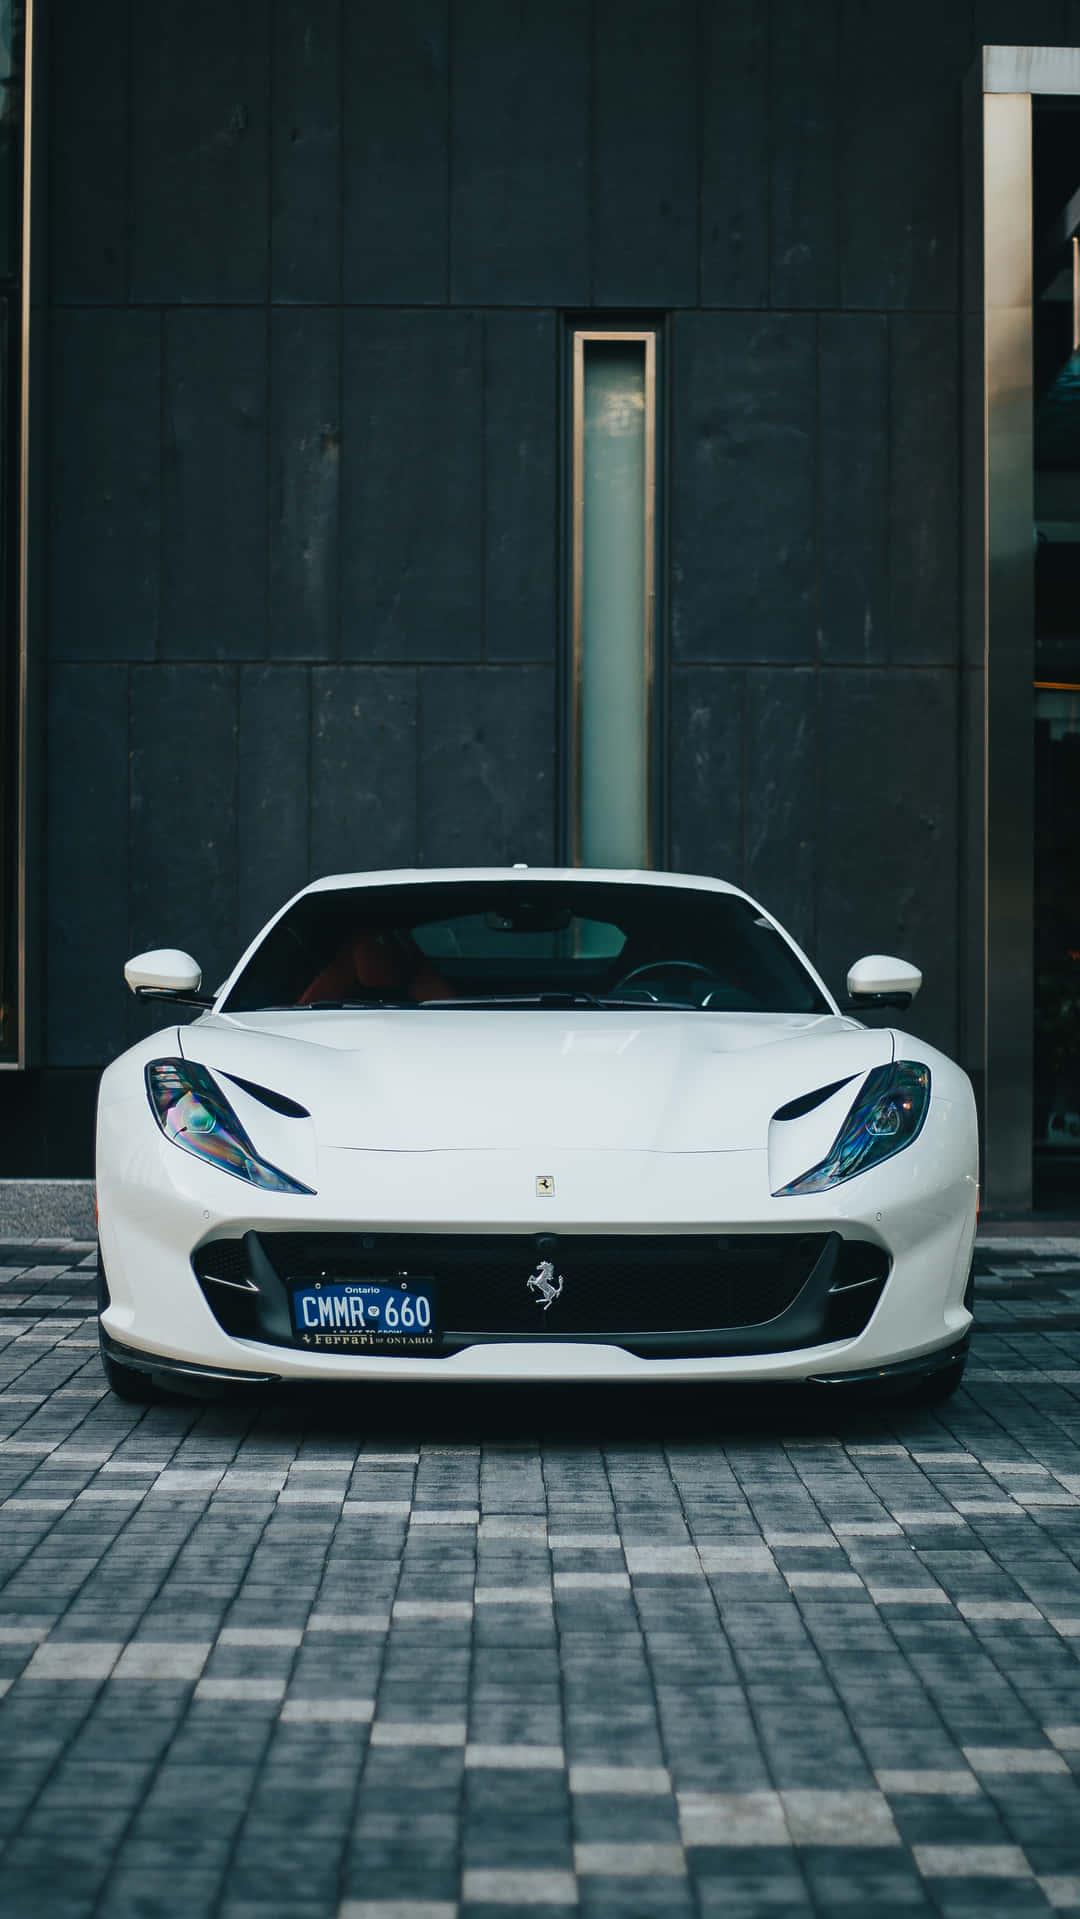 Driving Luxury In Style With A White Ferrari iPhone